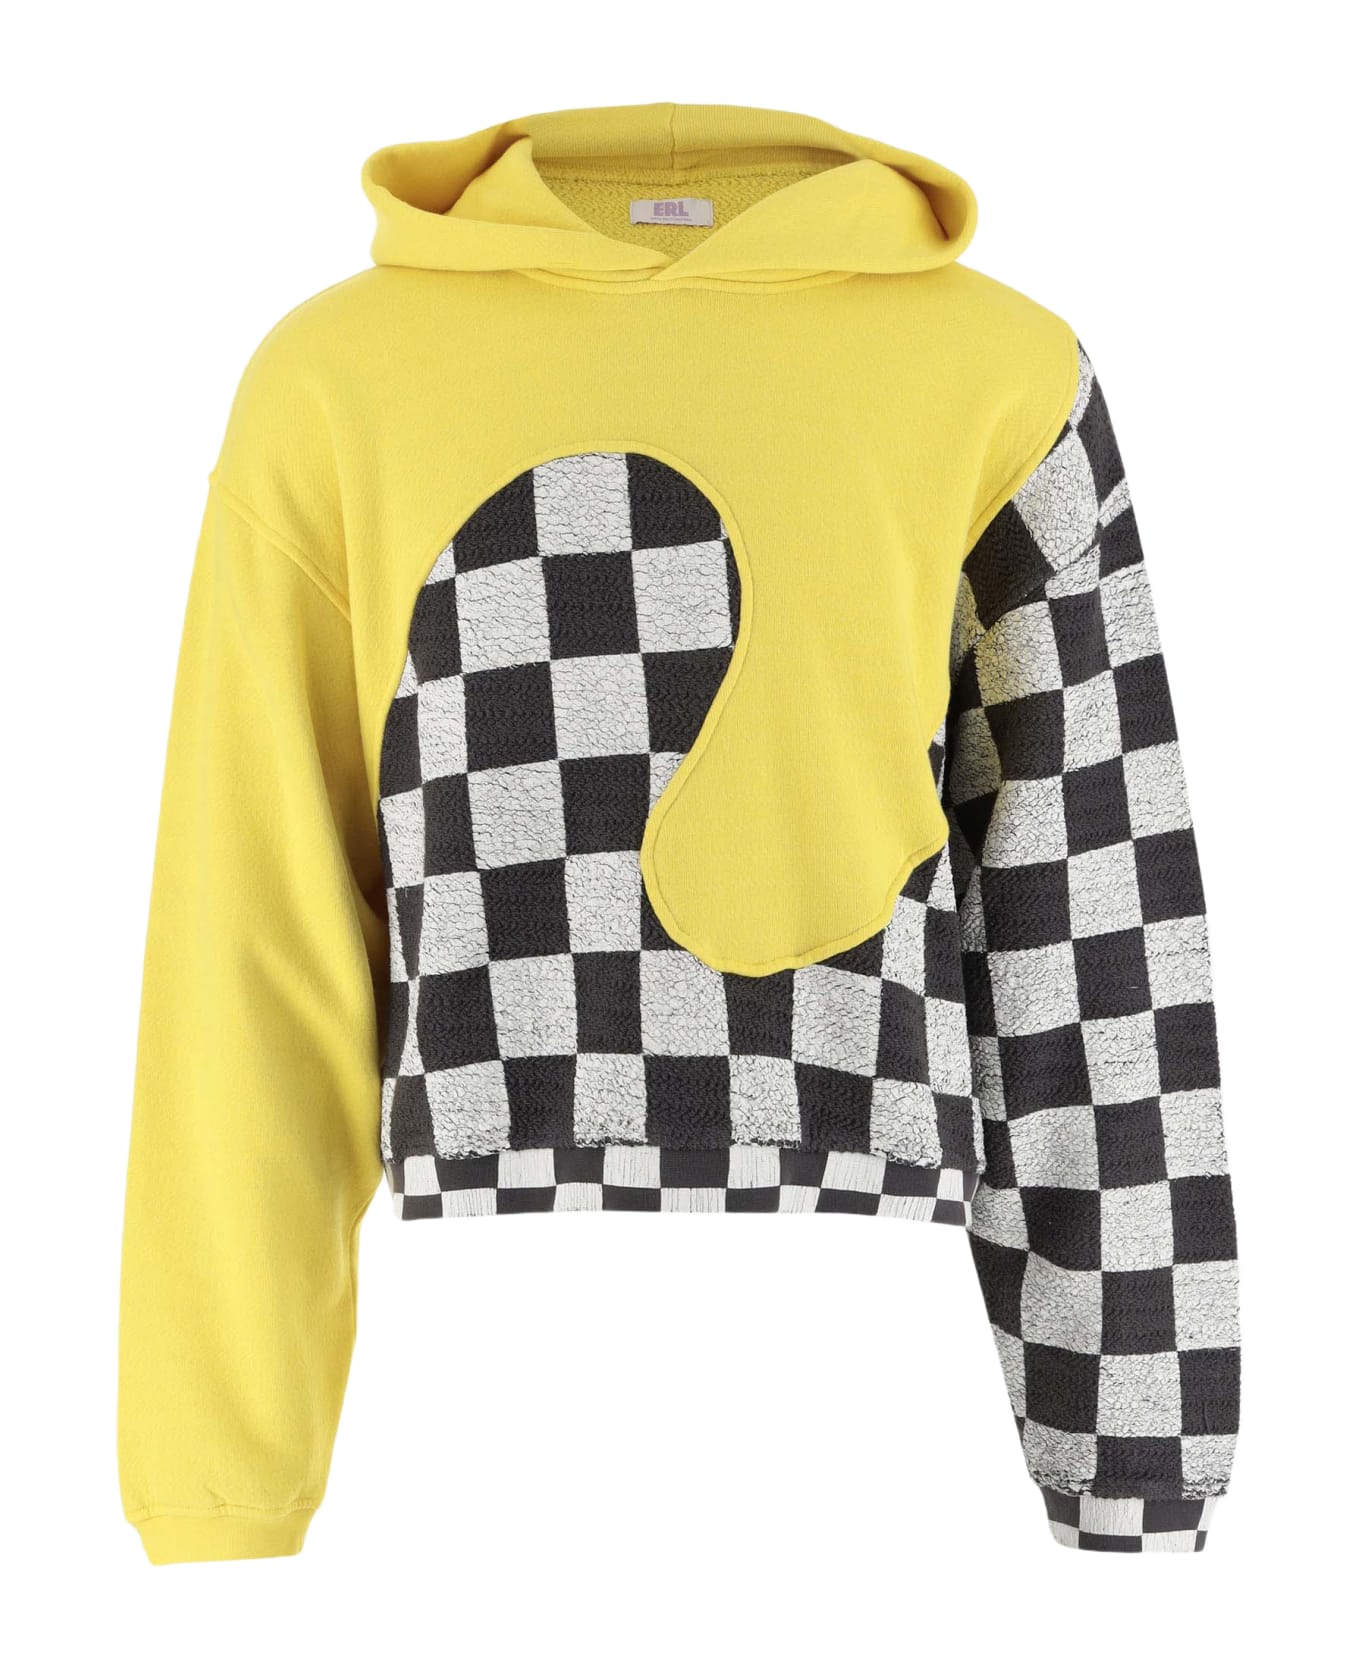 ERL Cotton Sweatshirt With Graphic Pattern - Yellow